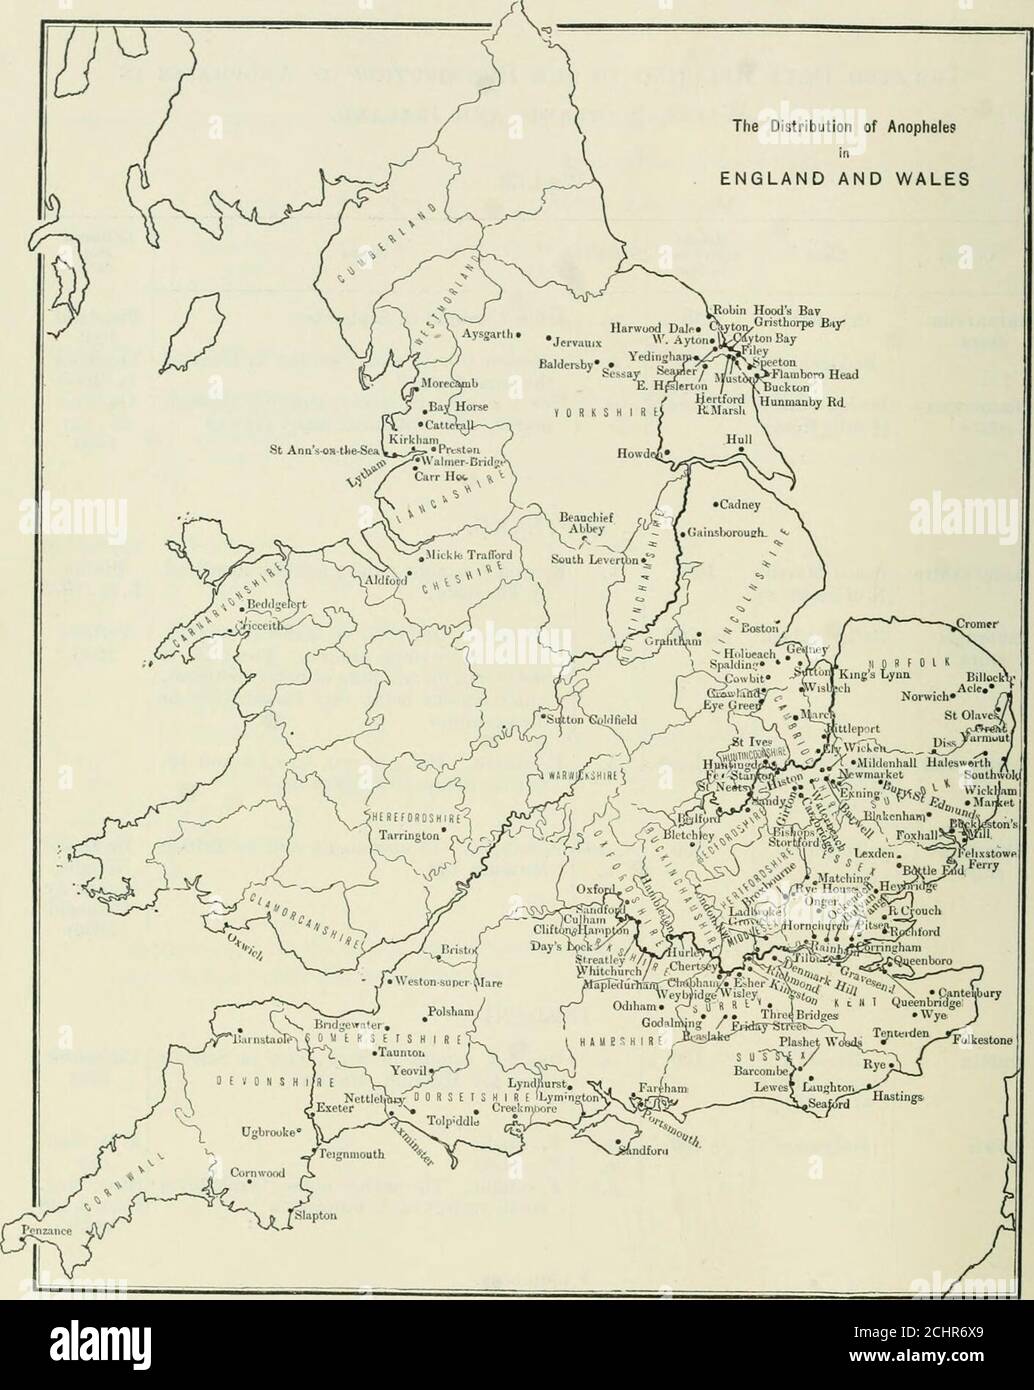 . The Journal of hygiene . gh Gardner shire (^ mile from) marsh, and containing many prawns 25 . VIII1900 Lanarkshire Fossil Marsh(N. of Glasgow) Inverness-shire Sutherland Nethy Bridge The Mound (Junction for Domoch) Aberdeen- j Torphinsshire 100ca. 700 sea-level SCOTLAND. Several f. caught d and ? (species identifiedby Theobald) F. caught. One ? 22. vi, and two &lt;? 24. vi,on damp, swampy ground. Two ? 15. viand 9. vii, on windows of hotel verandah,Culex pipiens being very troublesome inthe evening F. caught. One ? 8. viii, two&lt;f 4 and 10.VIII, on damp, swampy ground 300 m. andb. F. caug Stock Photo